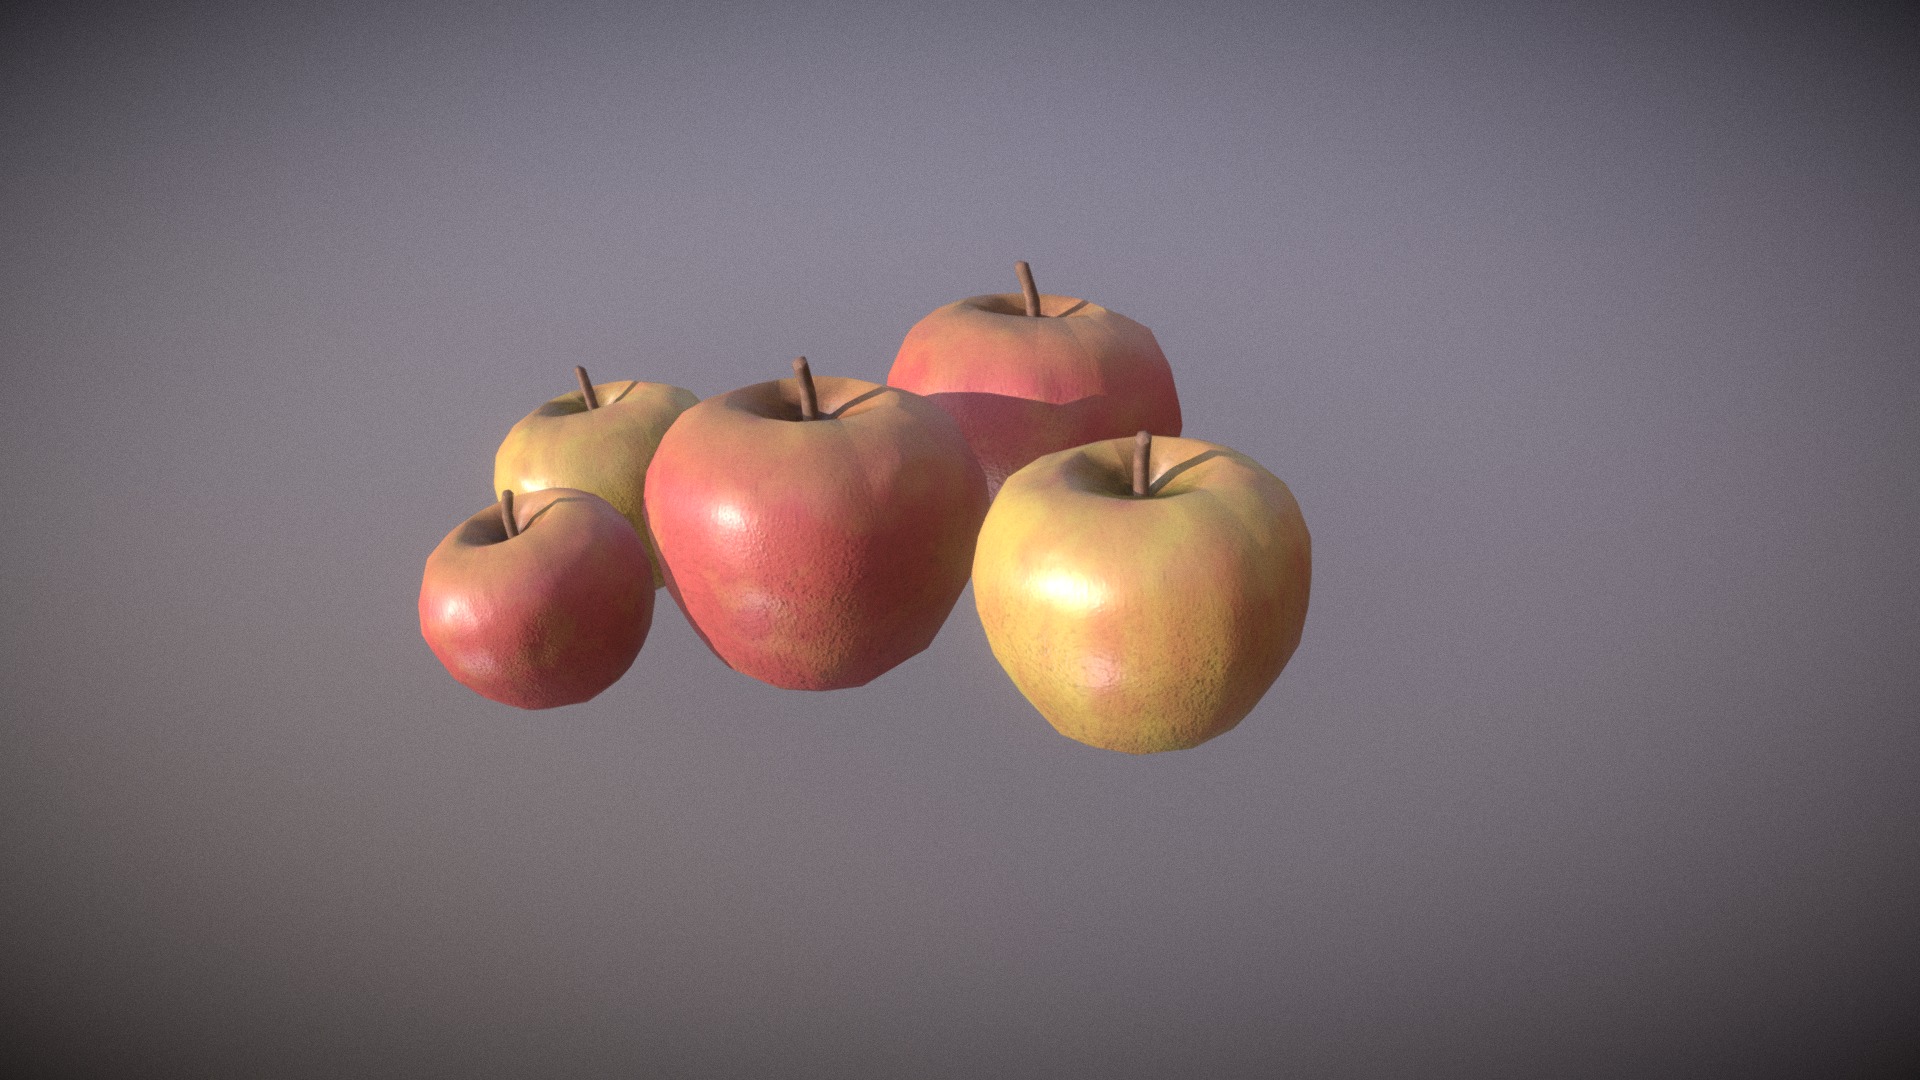 3D model Set of 2 Apples - This is a 3D model of the Set of 2 Apples. The 3D model is about a group of apples.